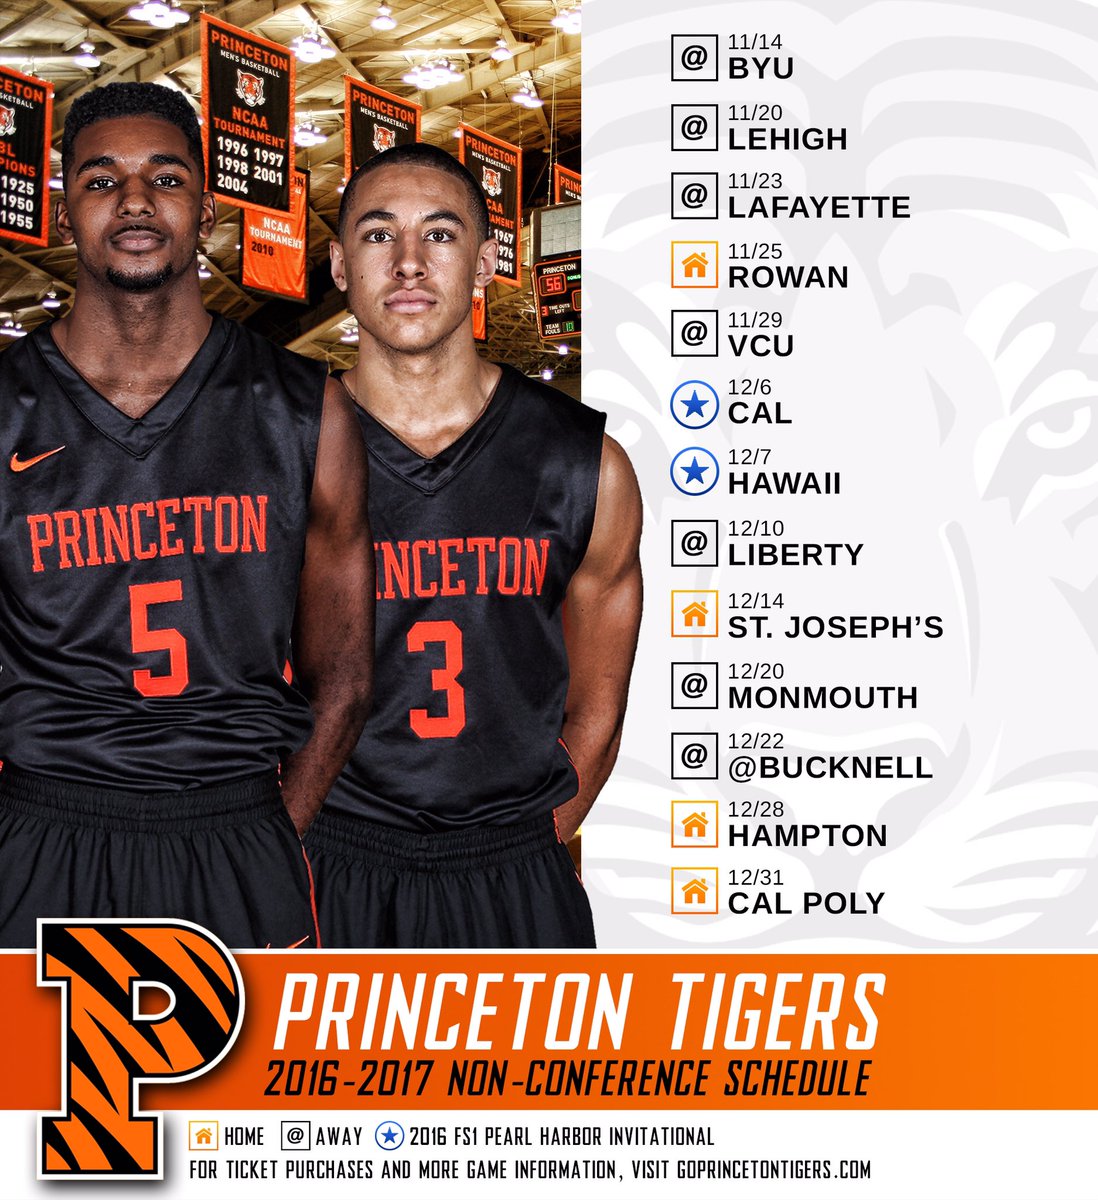 princeton basketball on twitter: "our 2016-2017 non-conference